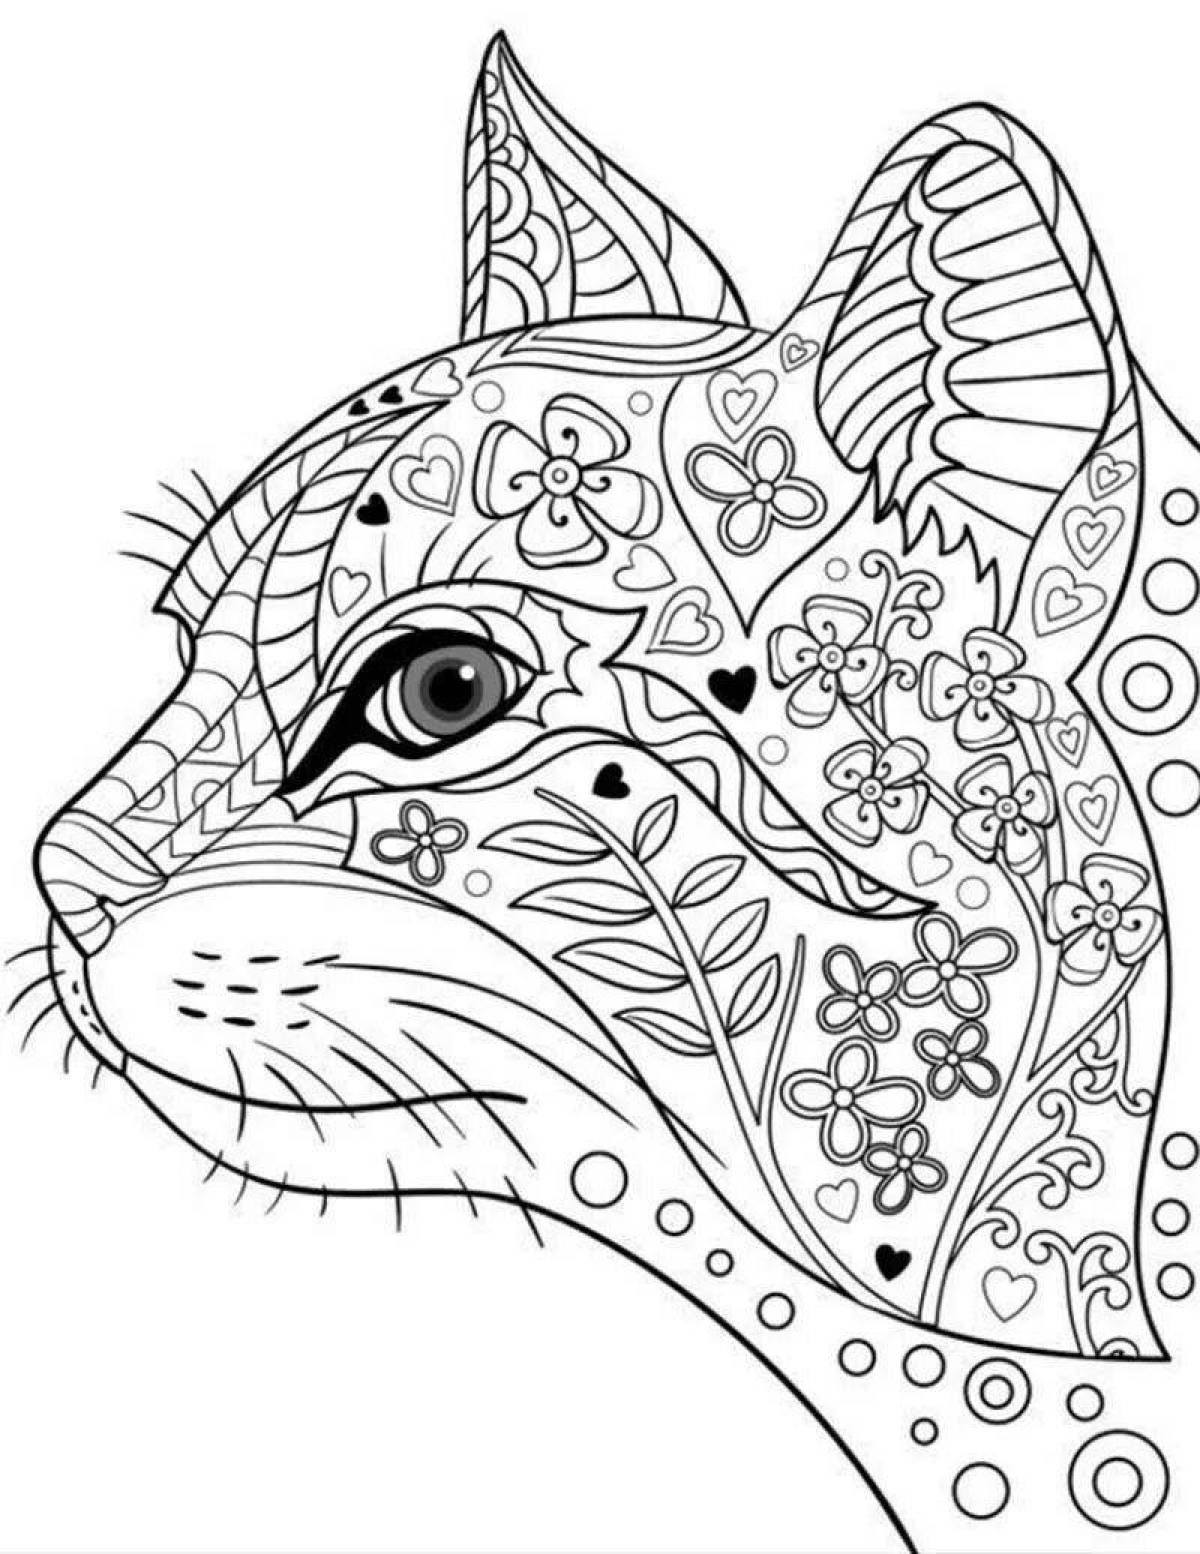 Exotic antistress coloring book for girls animals